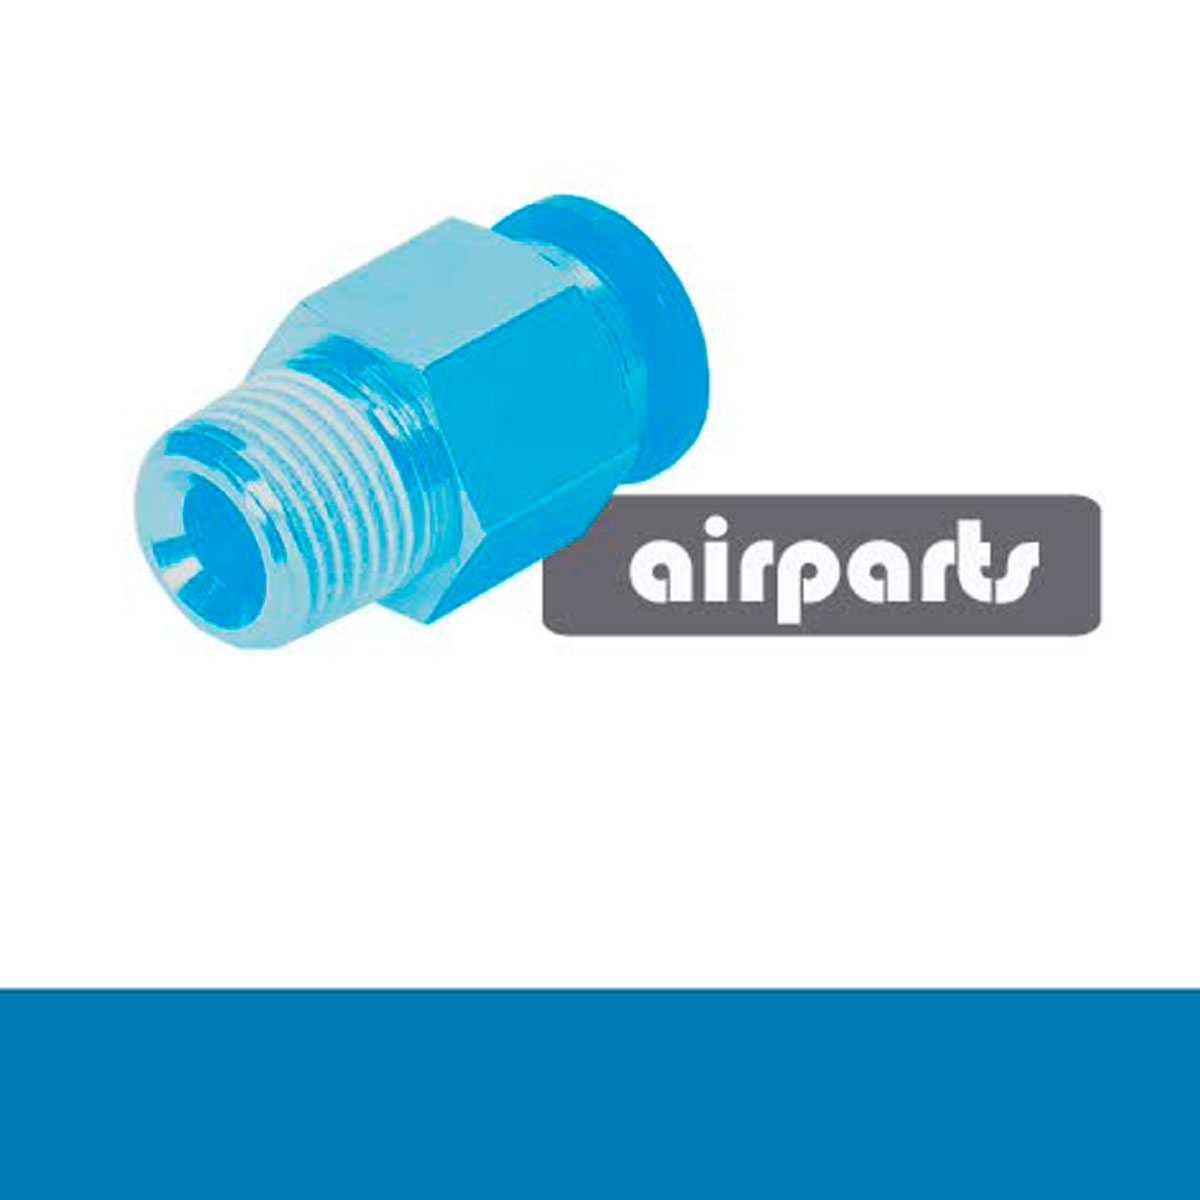 luchtbalg AirLift, SZ-55-20, 4mm koppeling